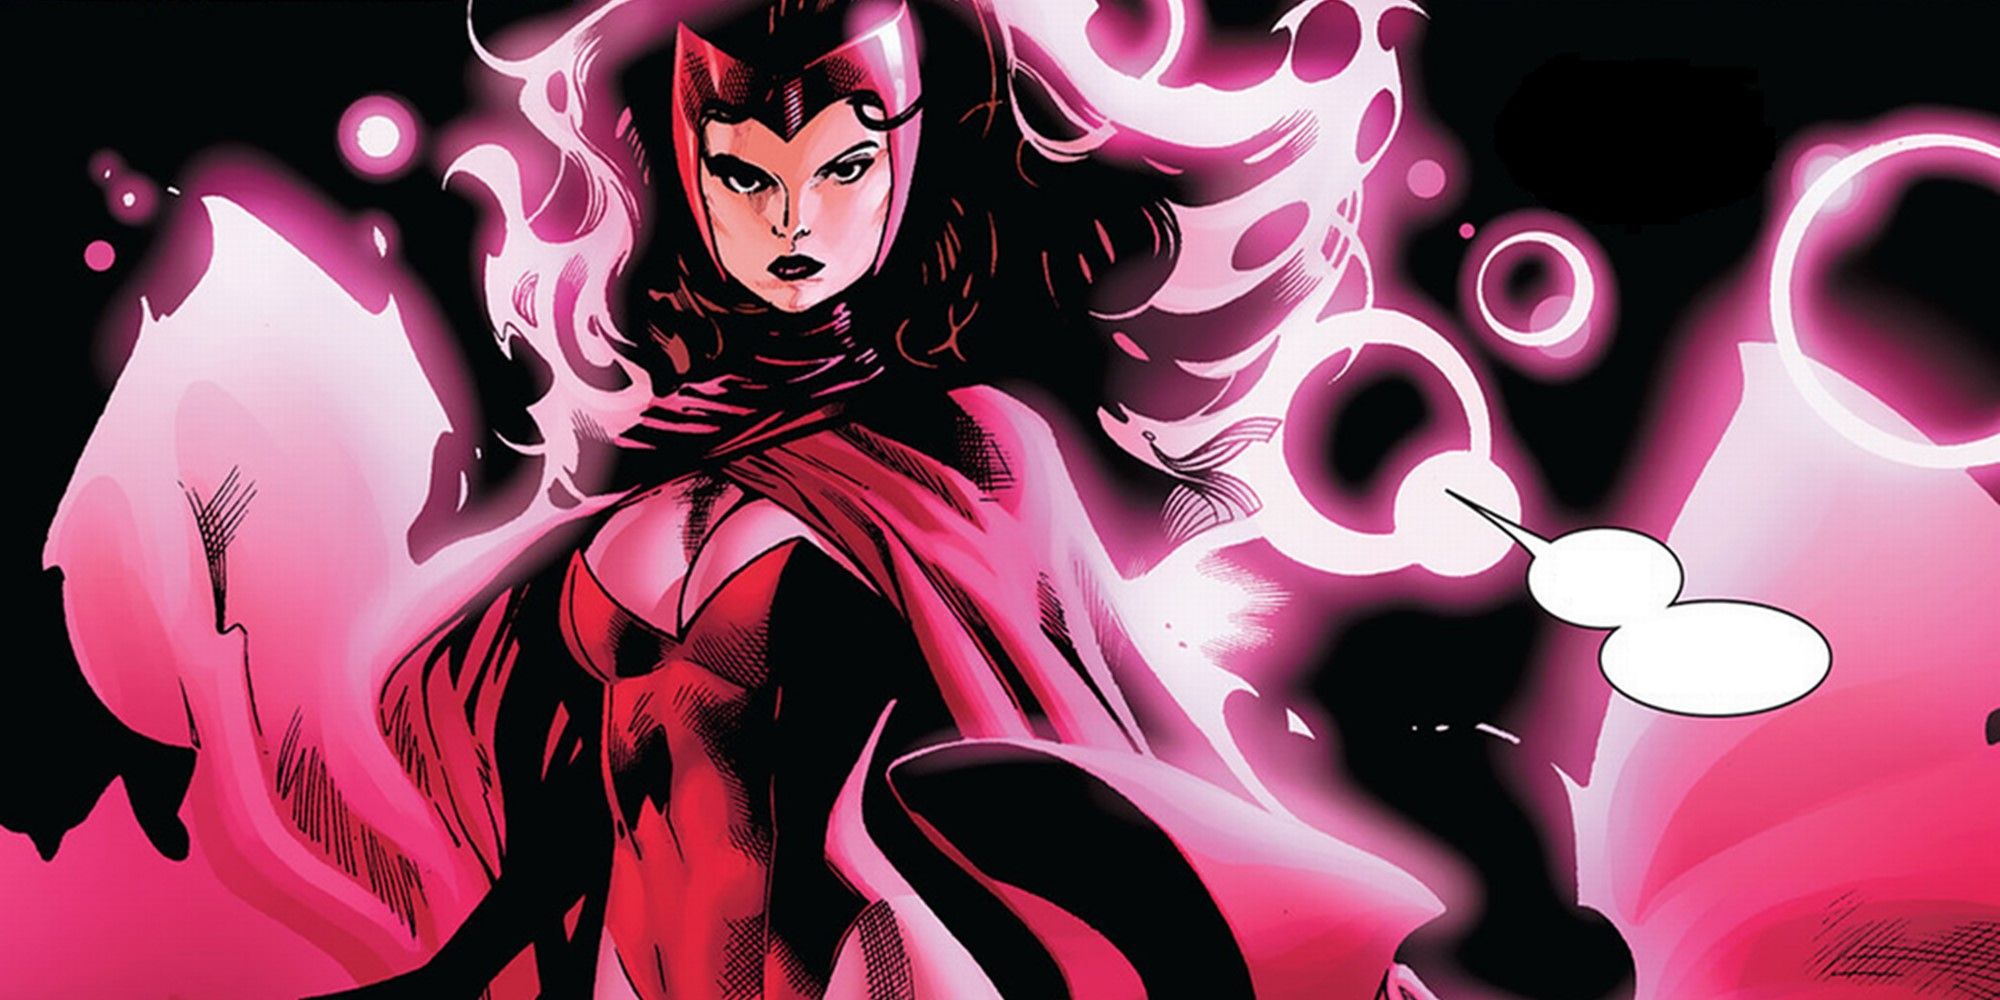 5 Dc Heroes Scarlet Witch Would Defeat 5 She Would Lose Against Each of the...